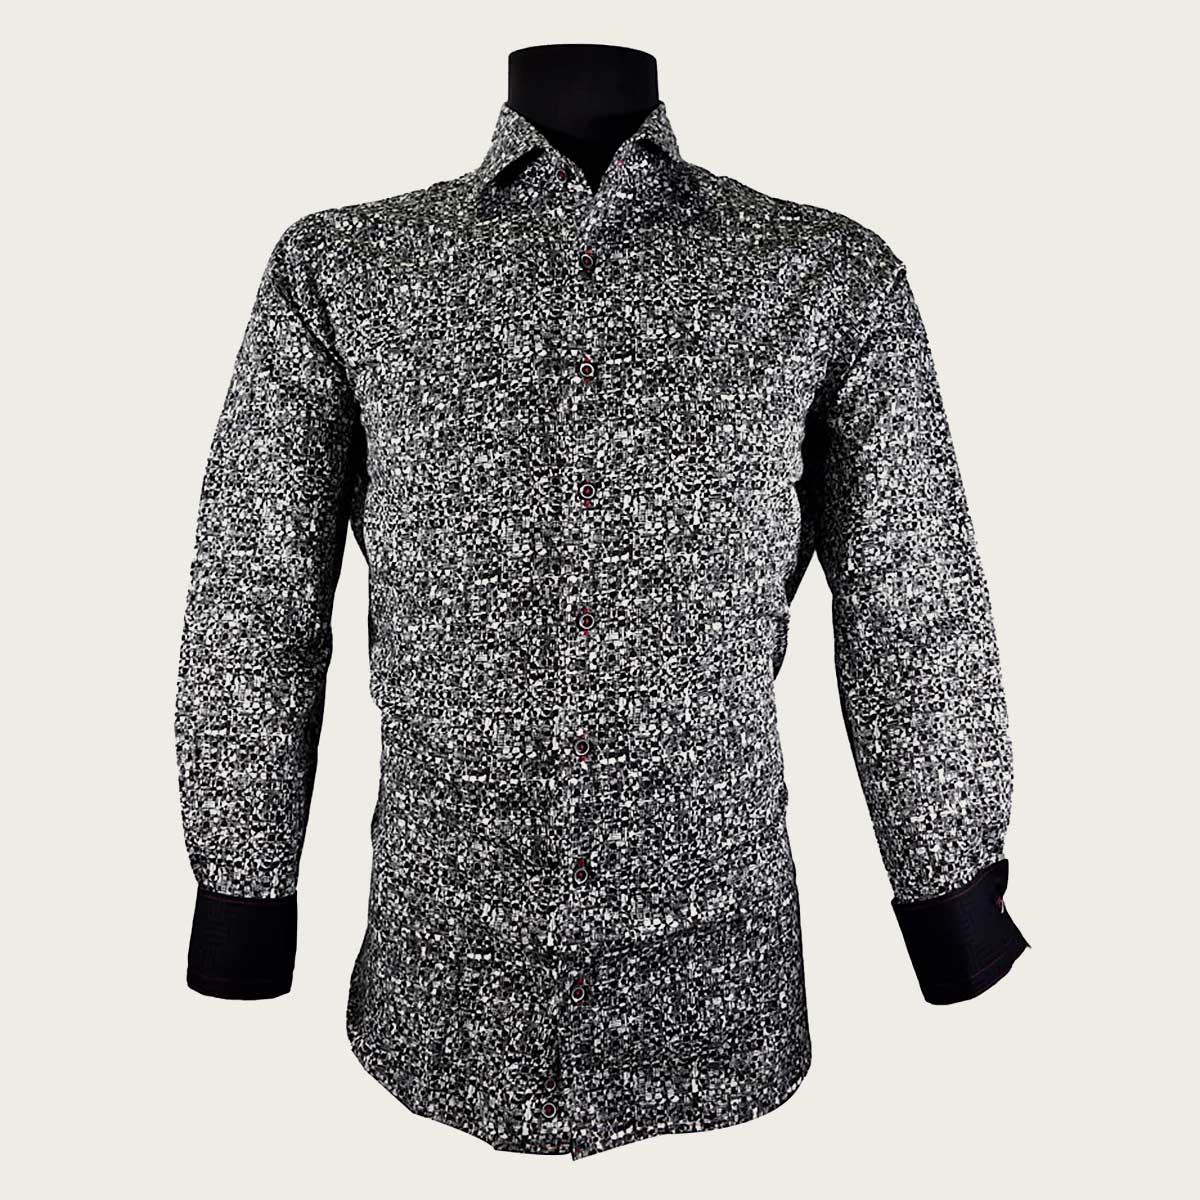 Black shirt for men with print in contrasting colors